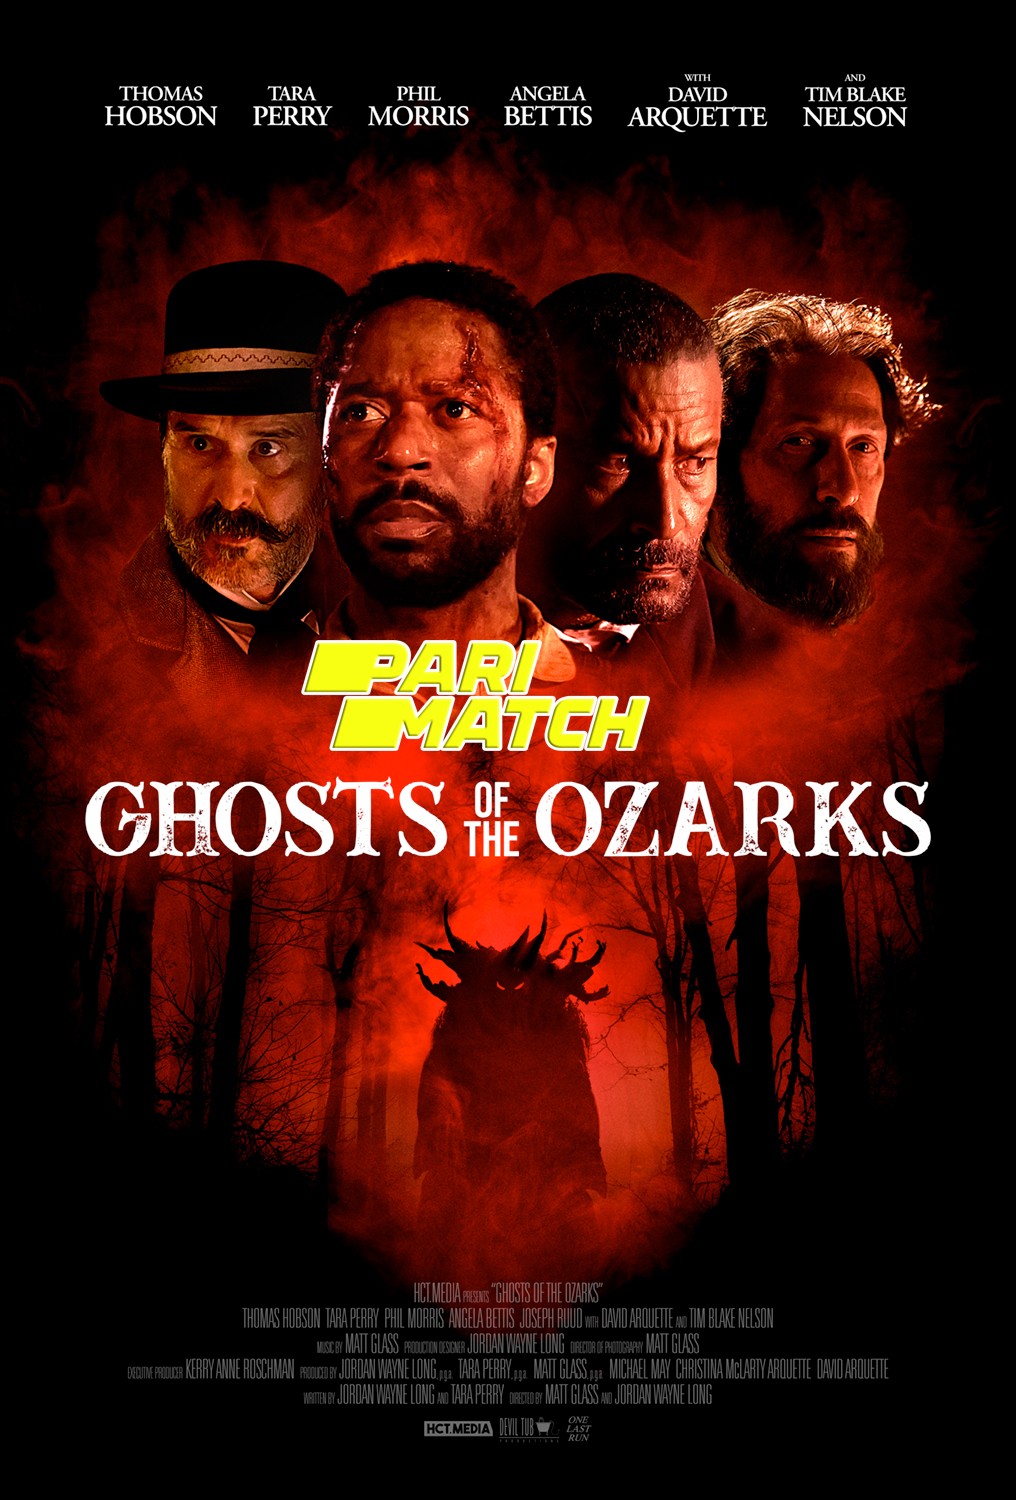 Ghosts of the Ozarks (2022) Bengali Dubbed (VO) [PariMatch] 720p WEBRip 1GB Download